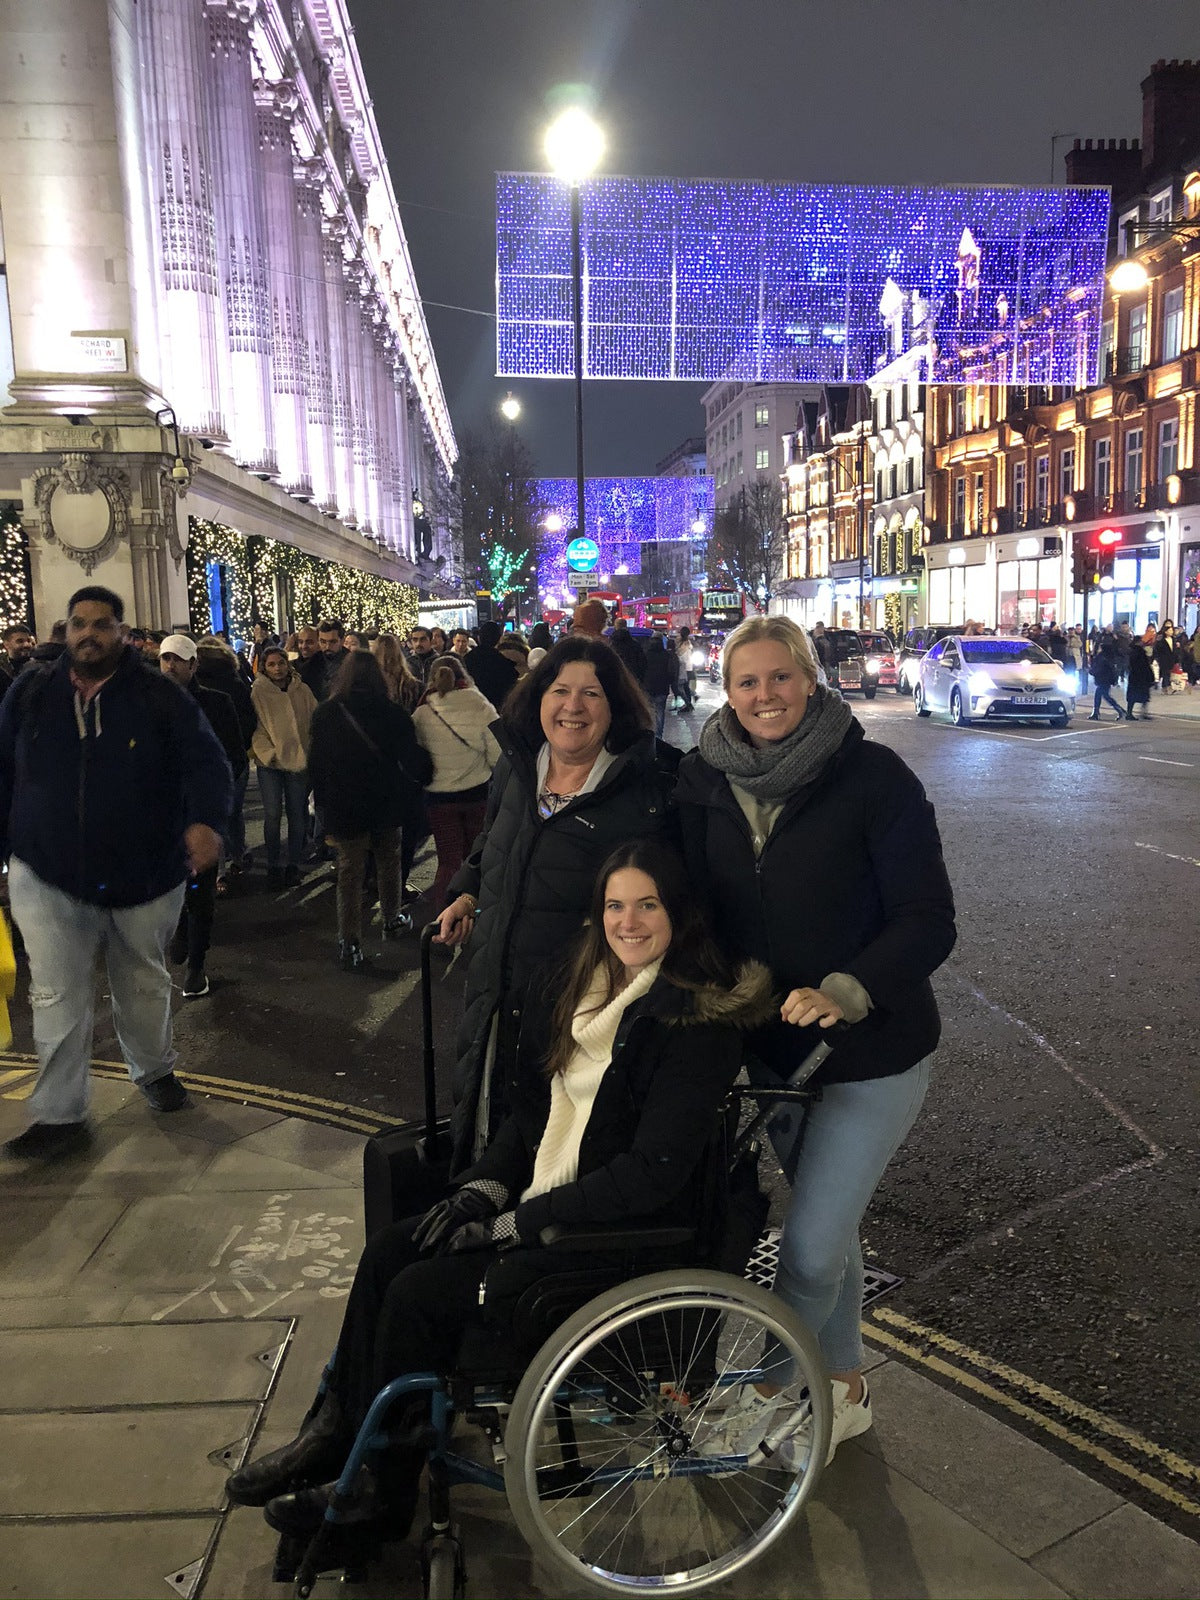 Alt text: Sarah sitting in her wheelchair, enjoying a night out on the town with family and friends.